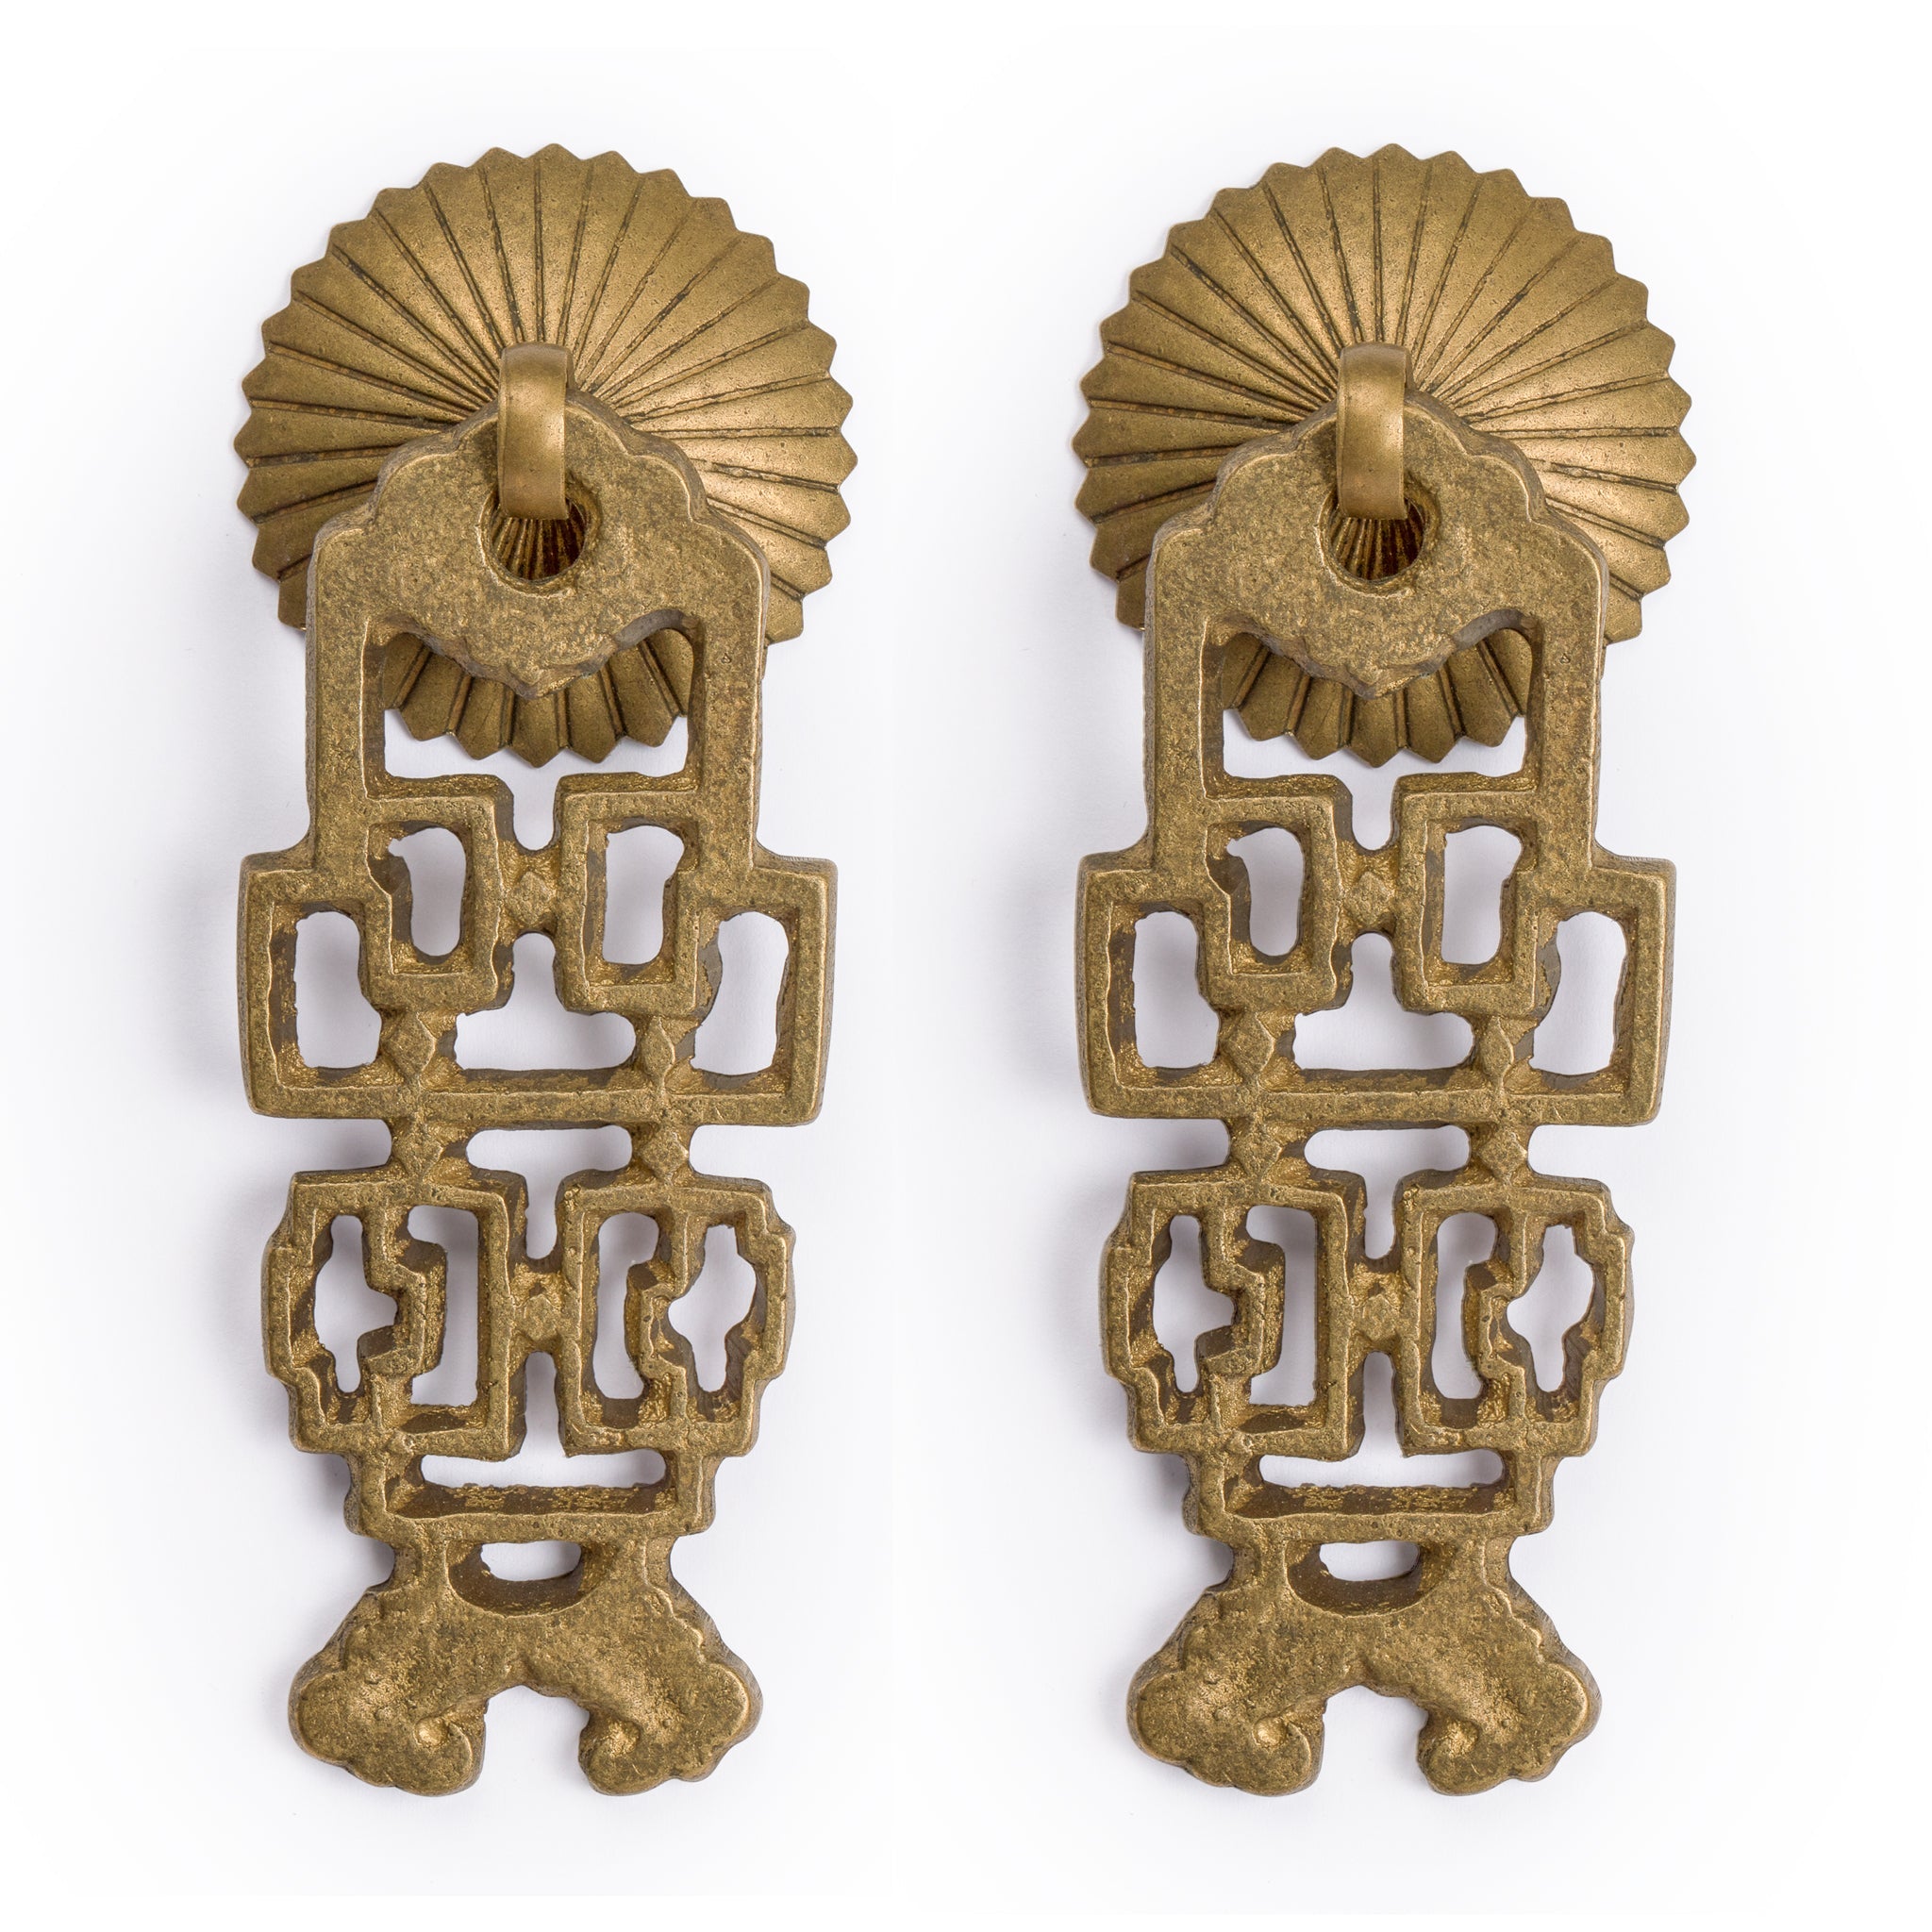 Ancient Throne Pulls 3.5" - Set of 2-Chinese Brass Hardware